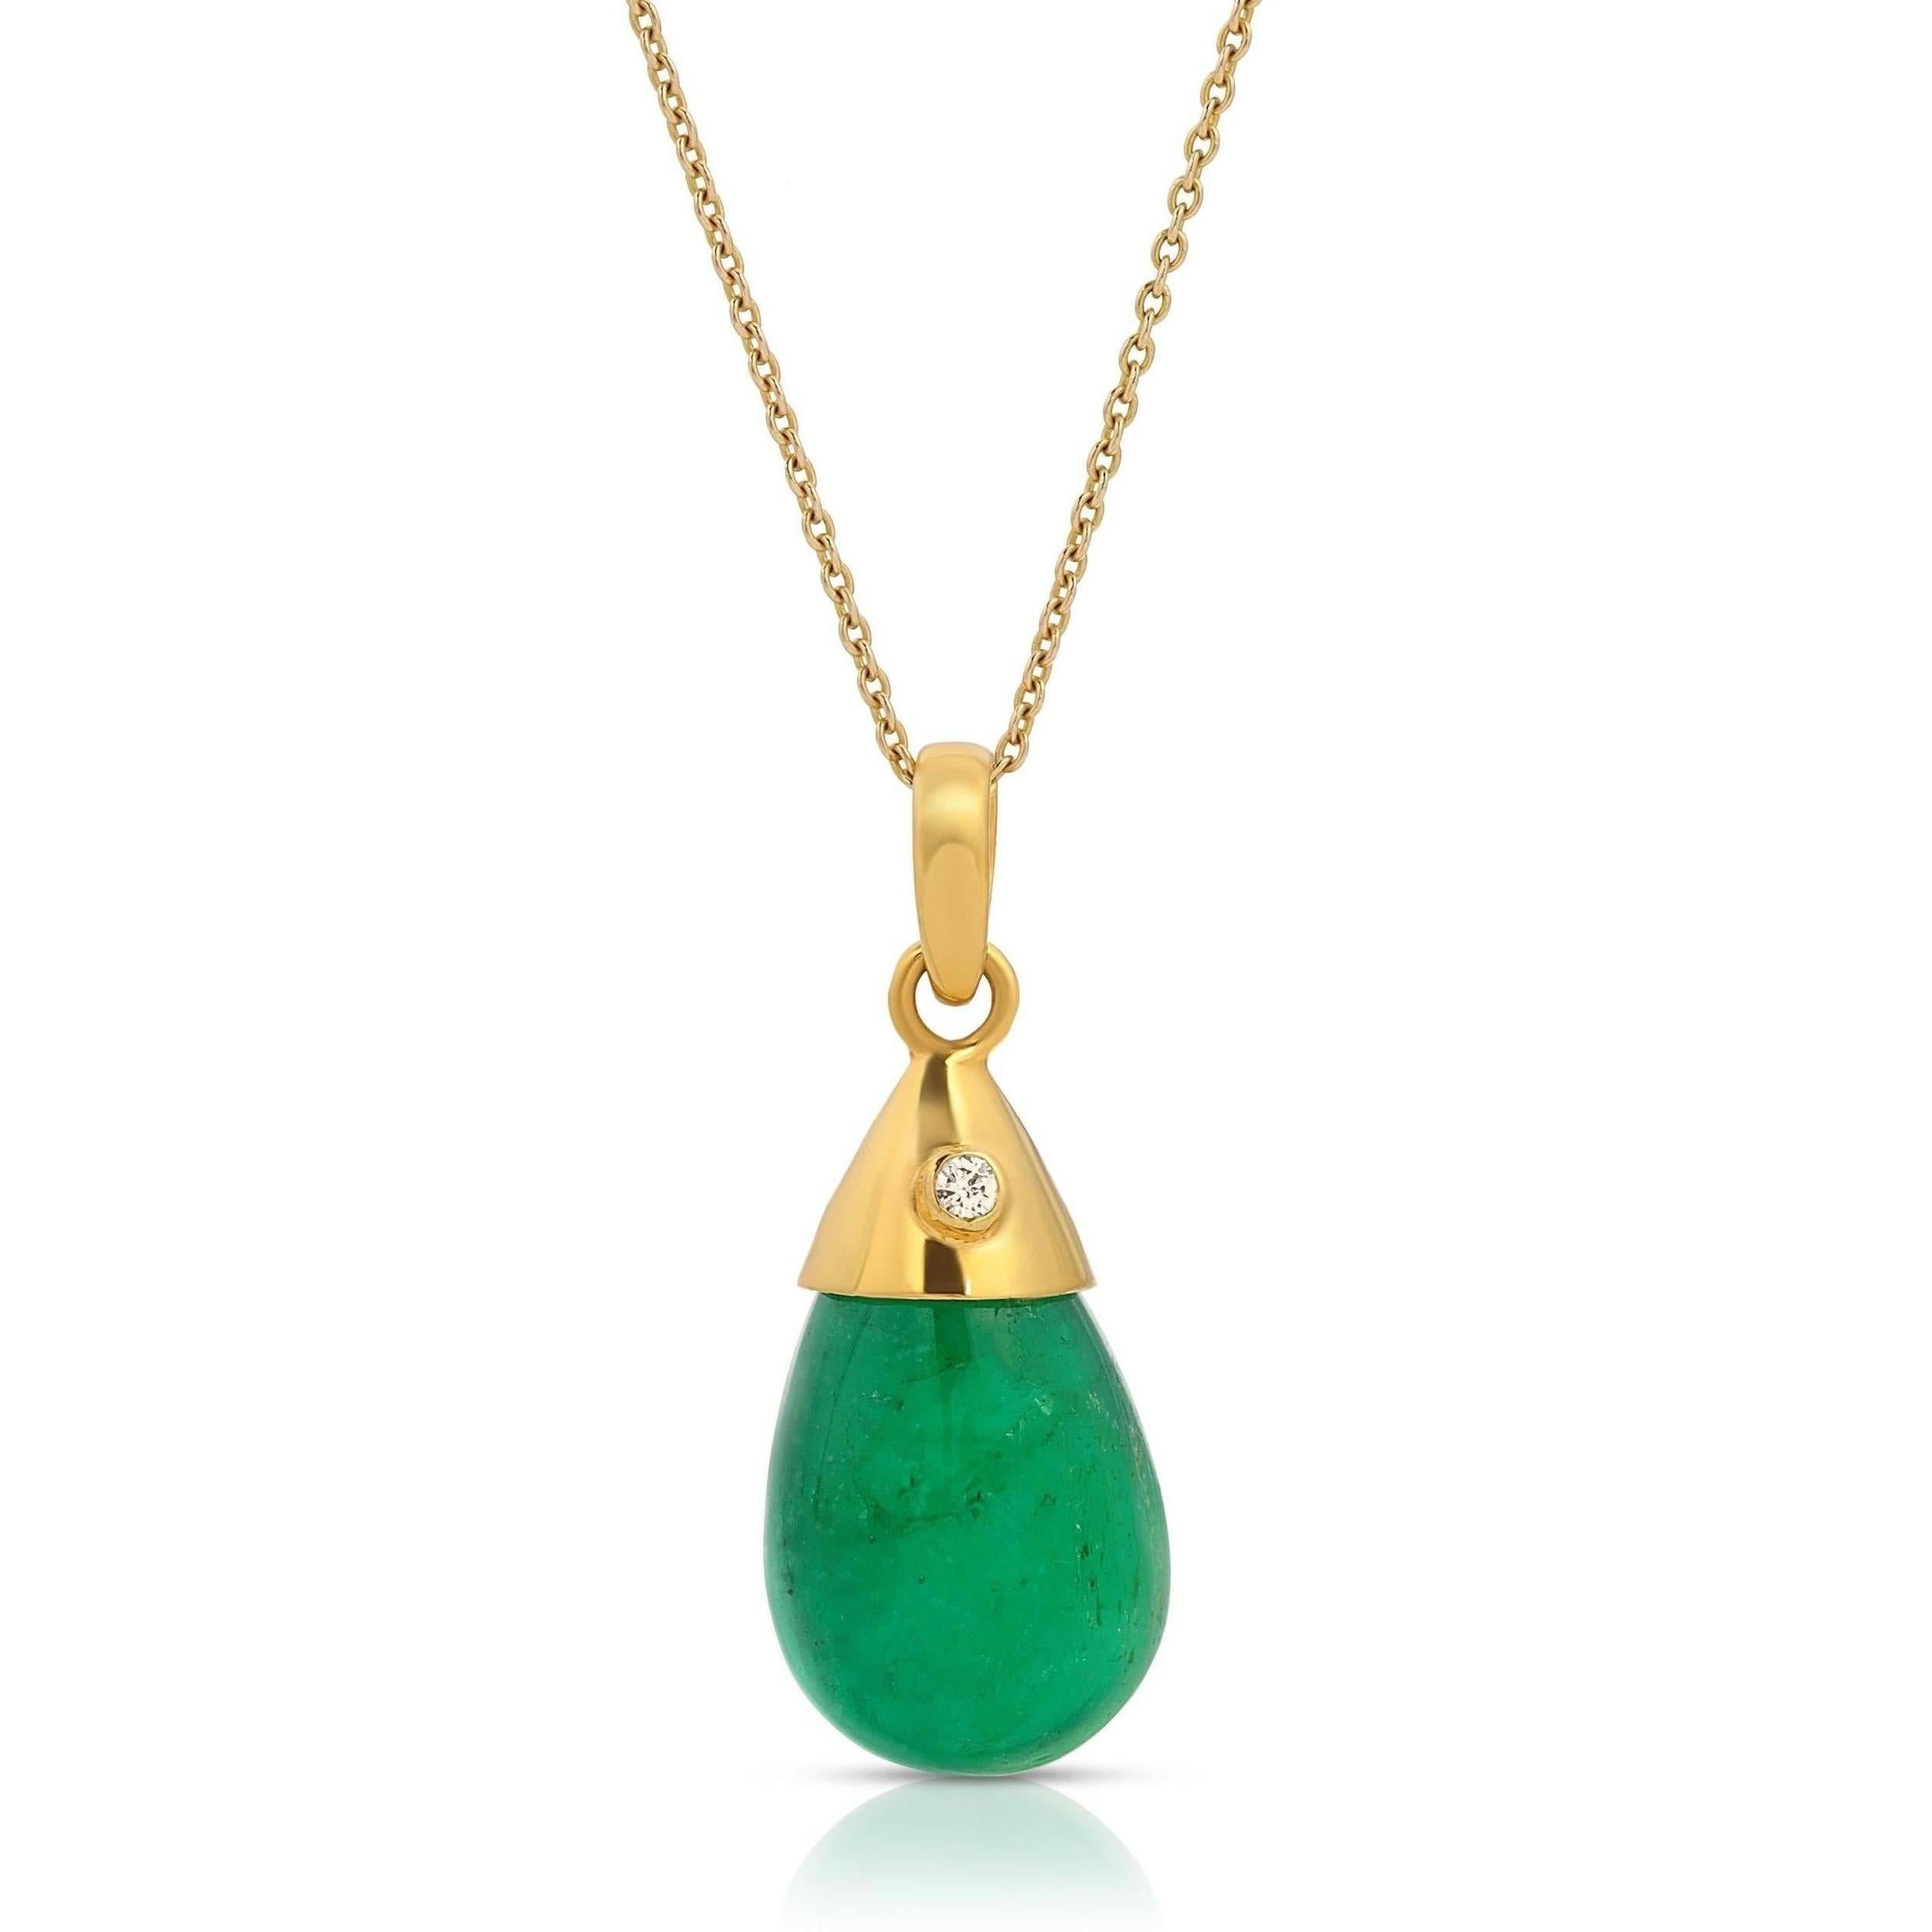 Emerald Bean Diamond Pendant. A beautiful natural pear shaped luminous emerald suspended by a gold cap encasing a single brilliant cut diamond. A spectacularly chic one of a kind pendant.

- Natural cabochon Emerald 10.2 carats.
- Brilliant cut